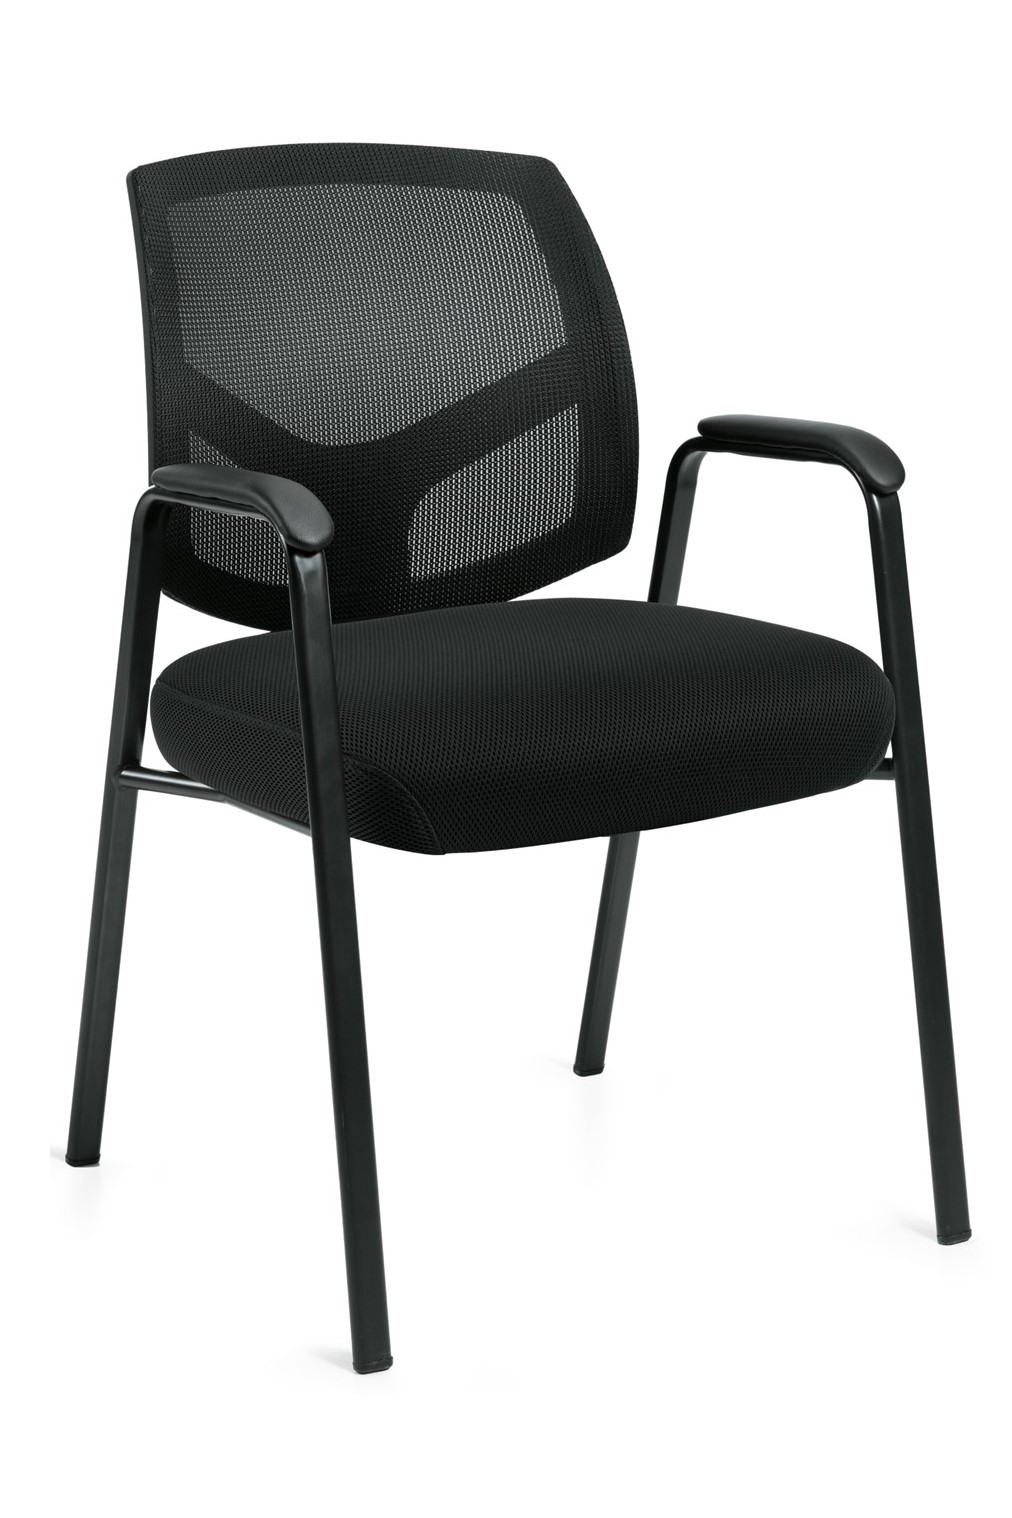 Midback mesh guest chair with black oval tubular steelbase, fabric seat and stylish back detail for maximum lumbar support.